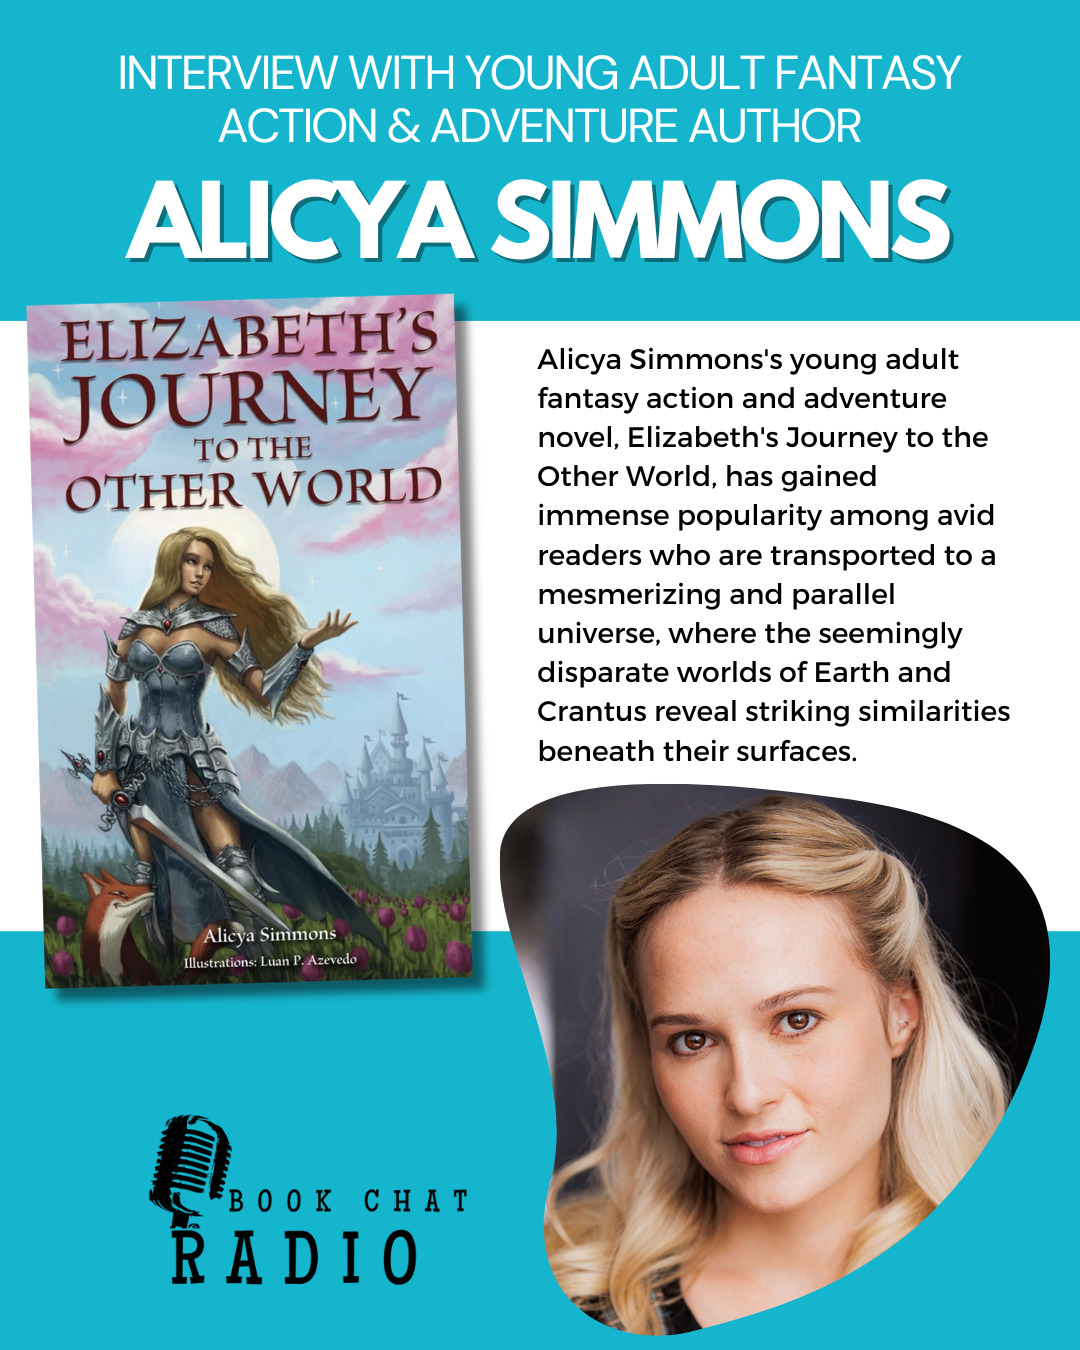 Interview with Young Adult Fantasy Action & Adventure Author Alicya Simmons